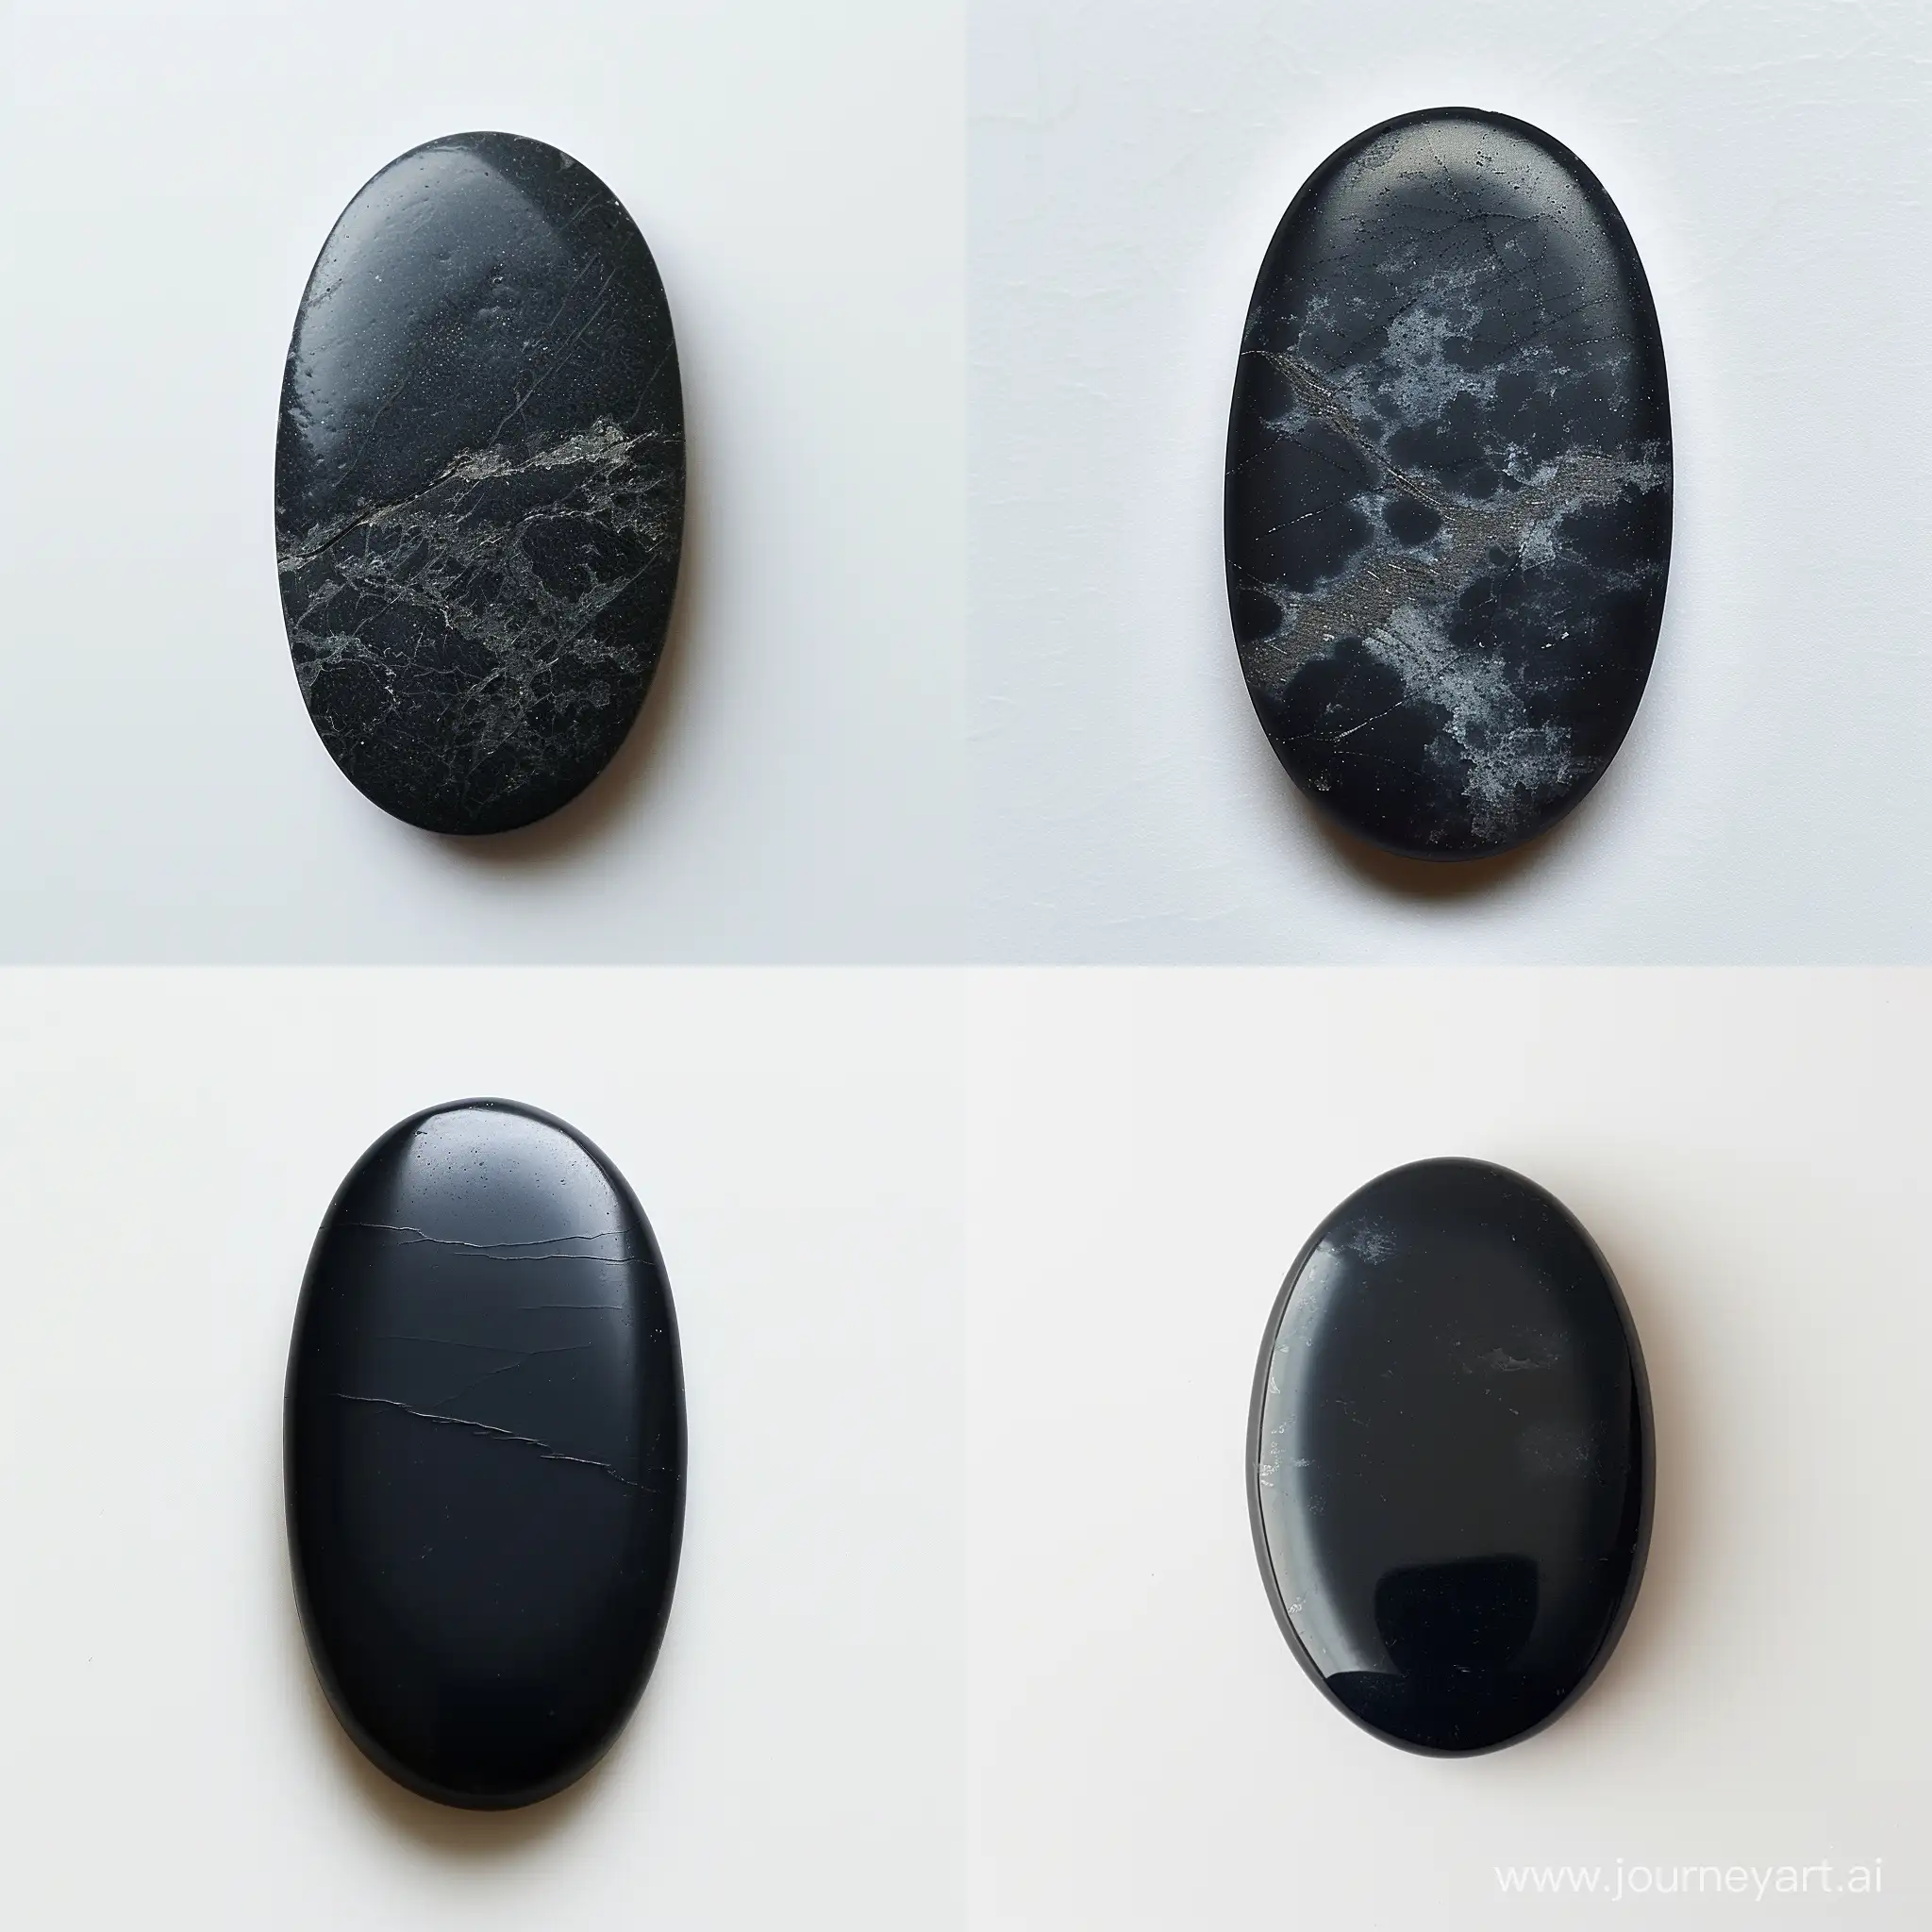 Beautiful stone one piece of oval shape dark black color matte texture monochrome slightly elongated horizontally polished cabochon of medium size on a white background view of the stone from above on a light background